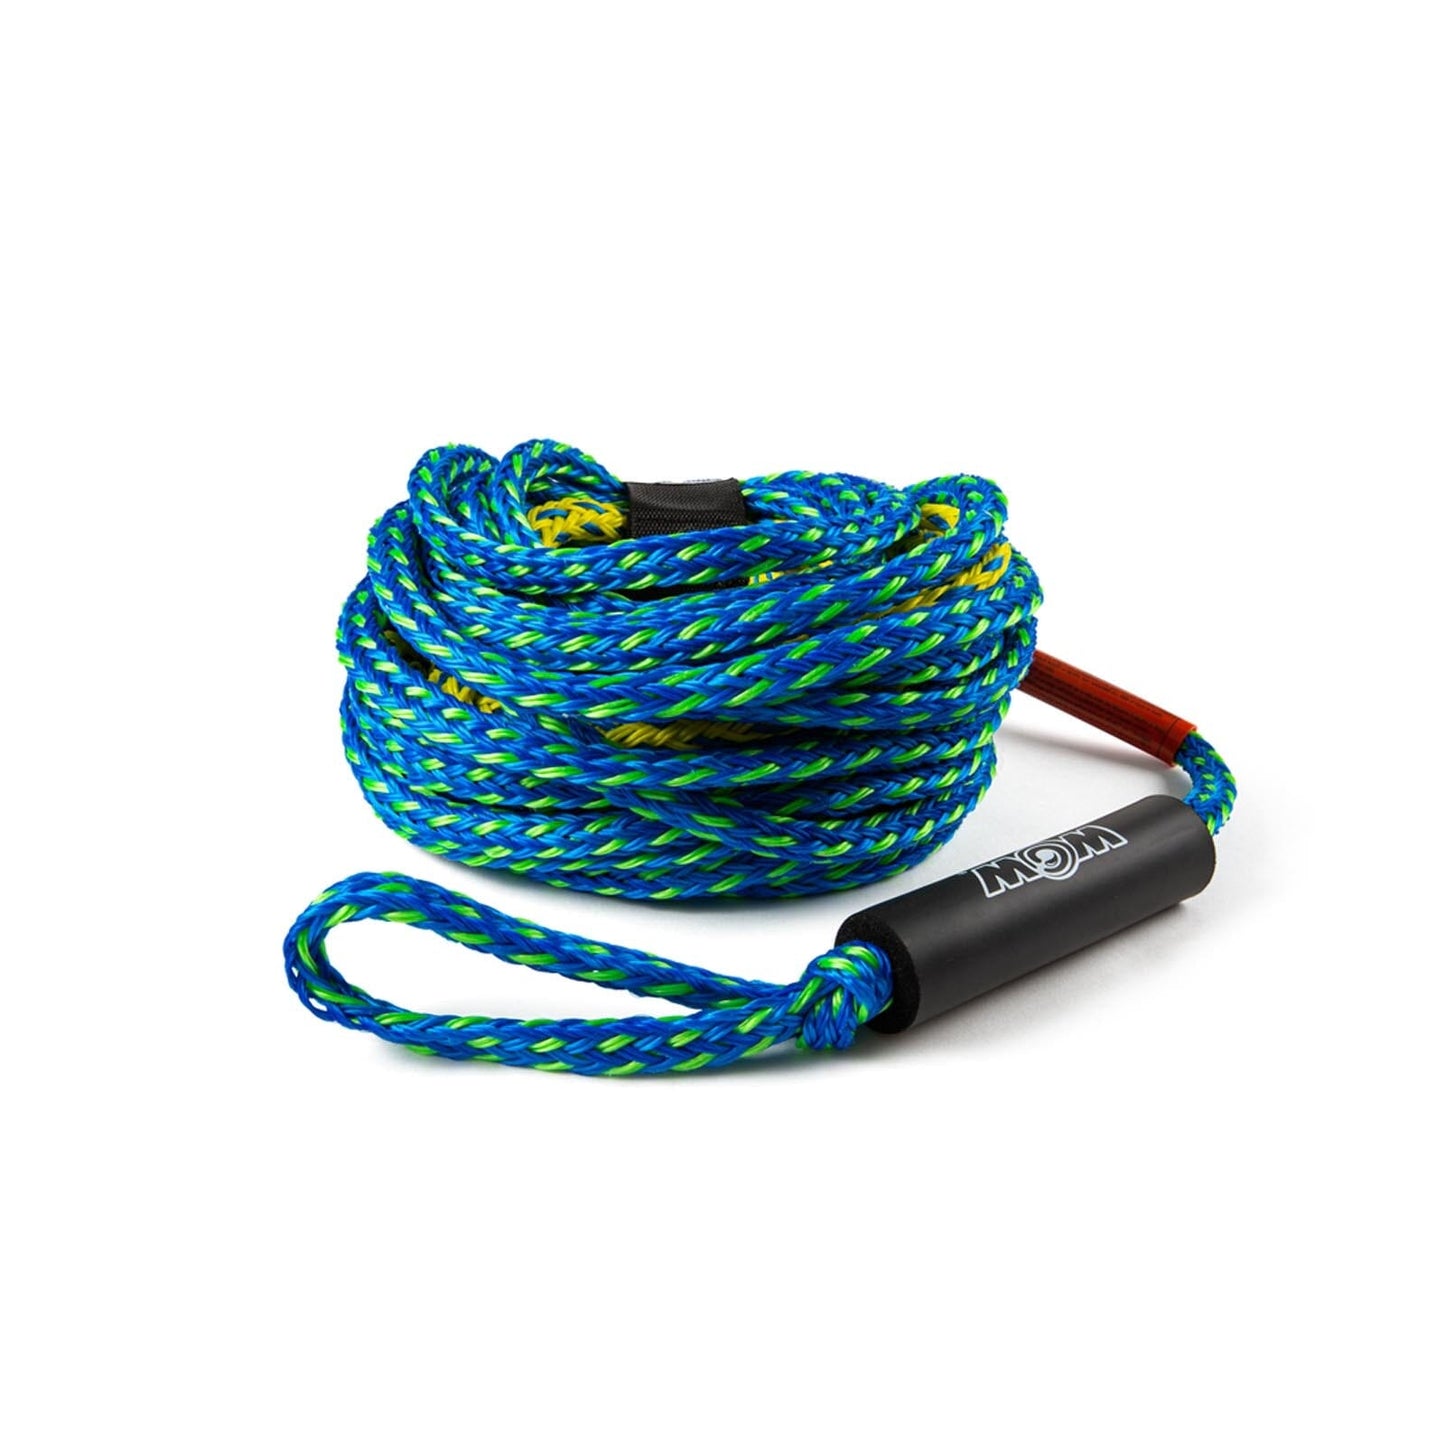 60' Tow 4-rider 4K tow rope with 2 sections